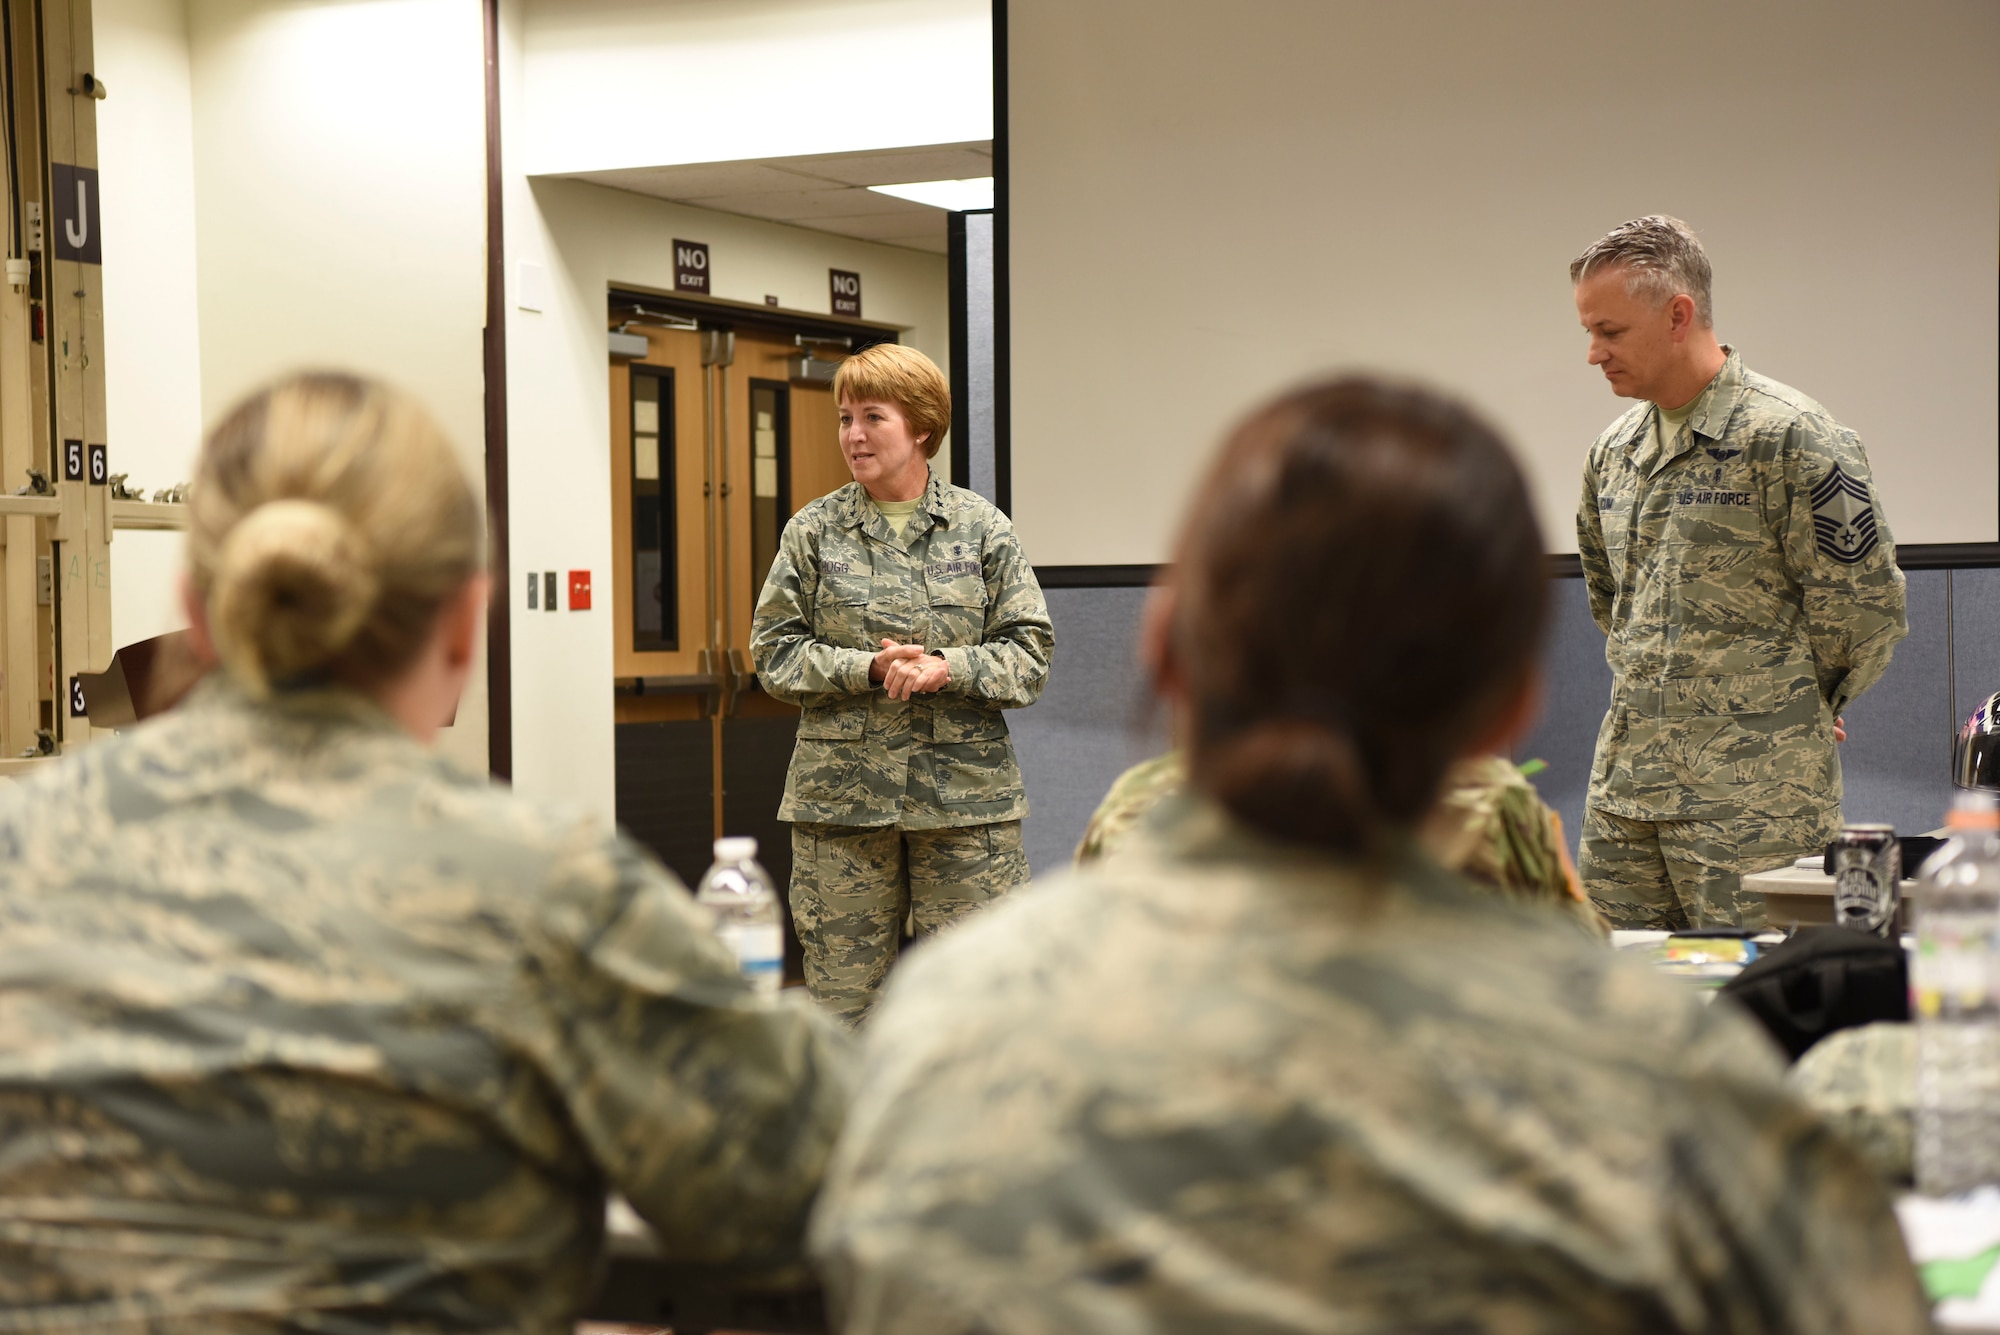 U.S. Air Force Lt. Gen. Dorothy Hogg, center, Air Force Surgeon General, and U.S. Air Force Chief Master Sgt. Steven Cum, Medical Enlisted Force and Enlisted Corps chief, answer questions about medical readiness at Osan Air Base, Republic of Korea, Sept. 24, 2018.